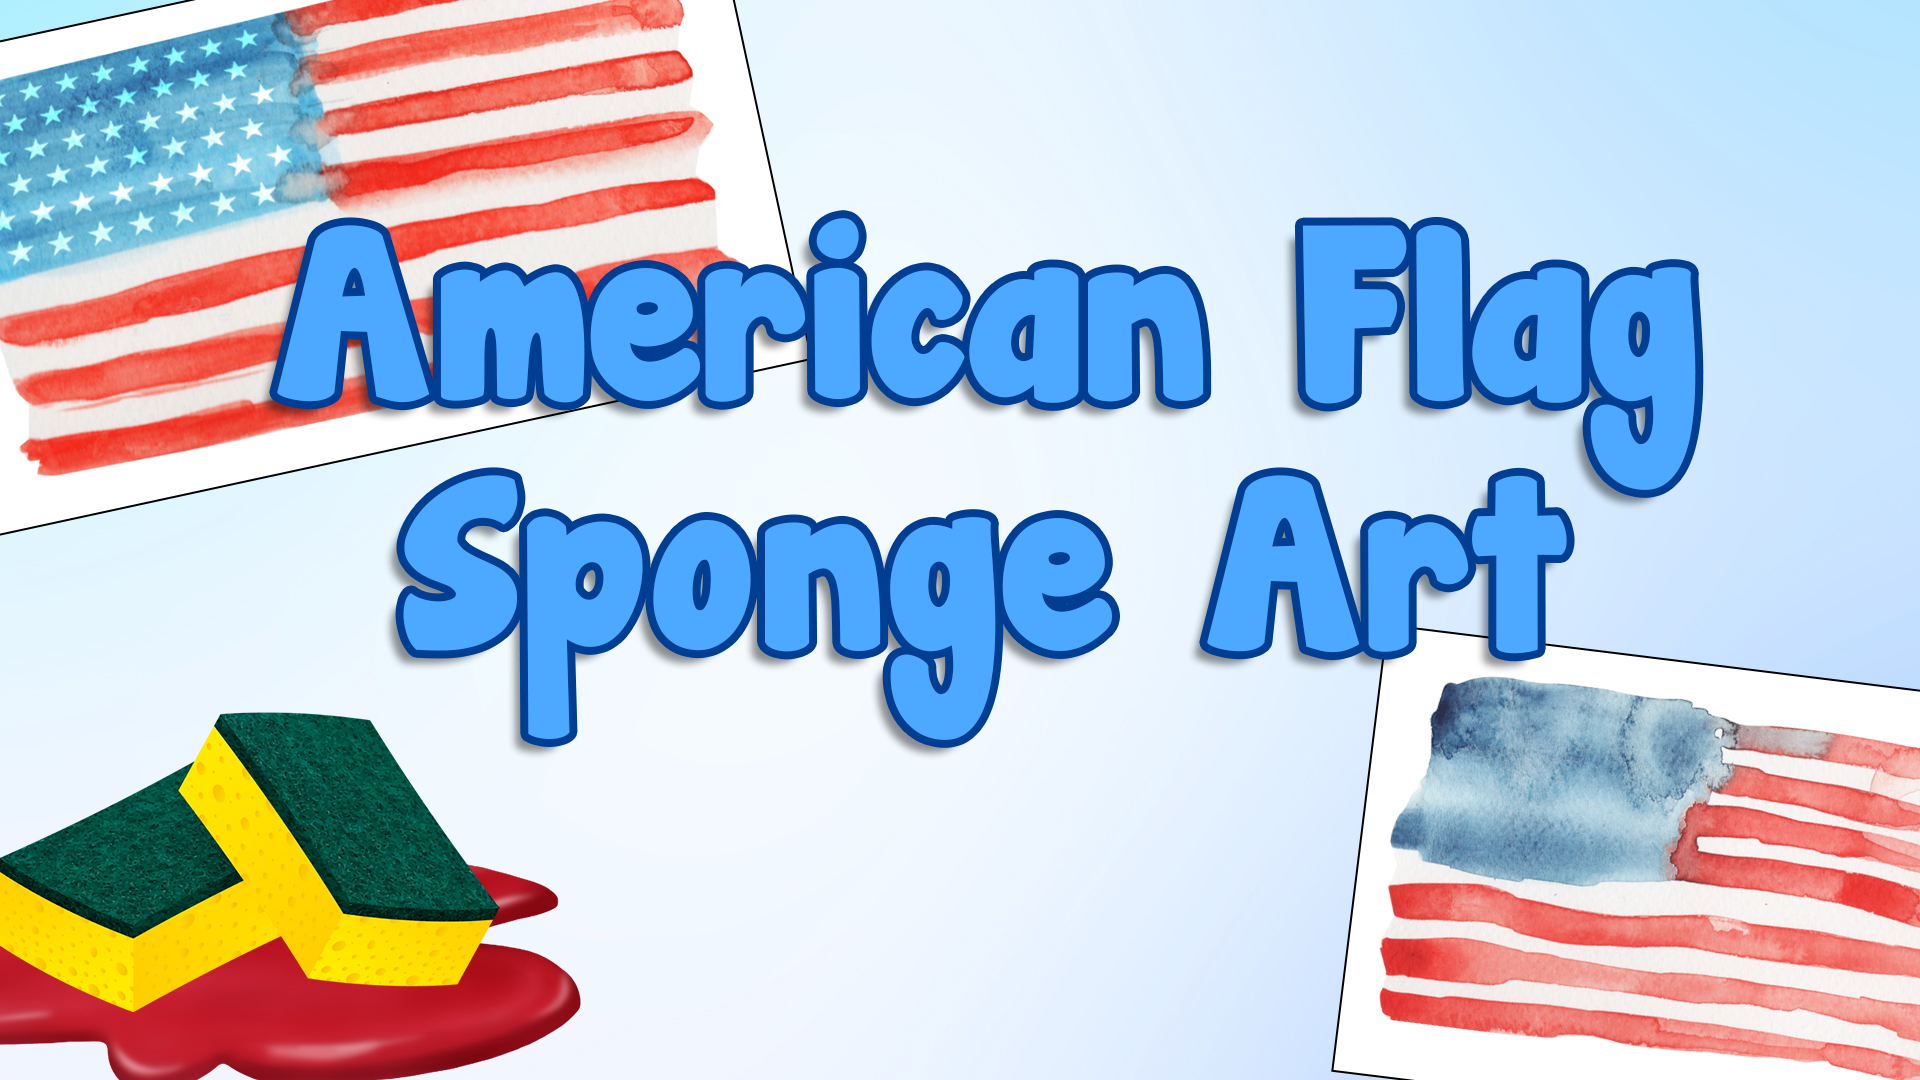 Image reads "American Flag Sponge Art" against a faded blue background. Two painted American flag pictures are around the title. Two sponges dipped in red paint are to the bottom left of the title.